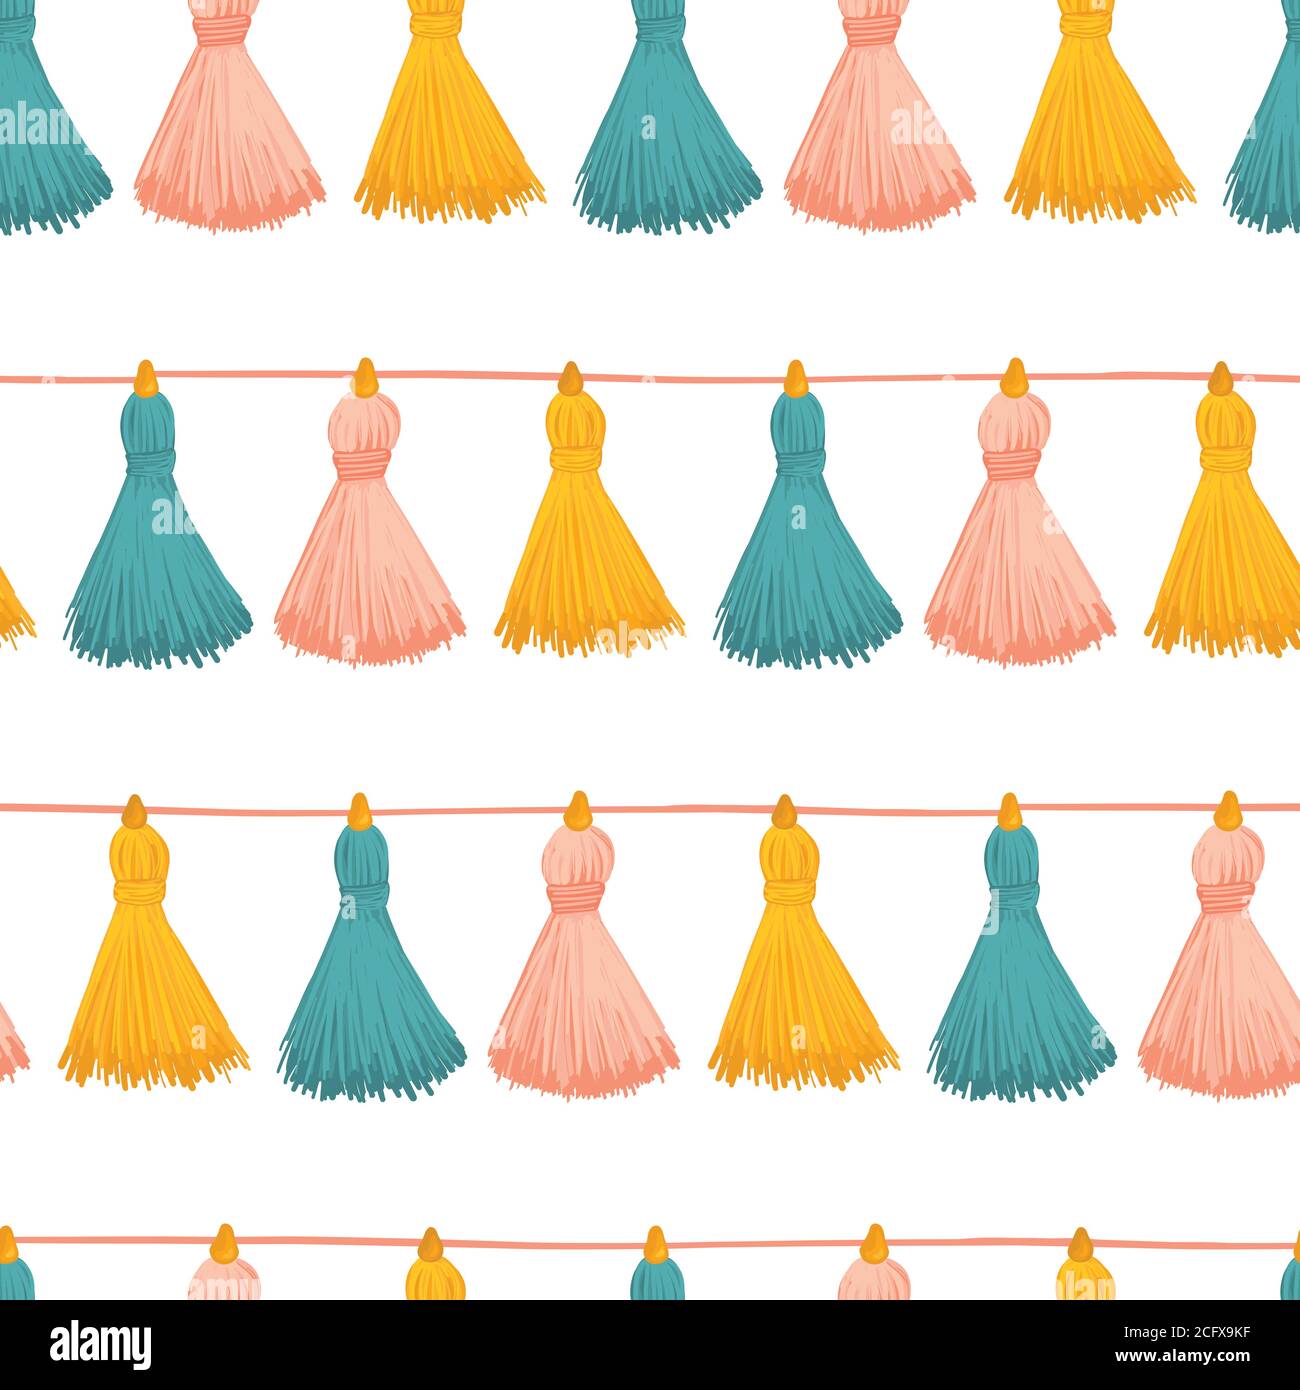 Tassels seamless vector background. Colorful decorative tassels repeating pattern. Great for cards, party invitations, wallpaper, packaging, fabric Stock Vector